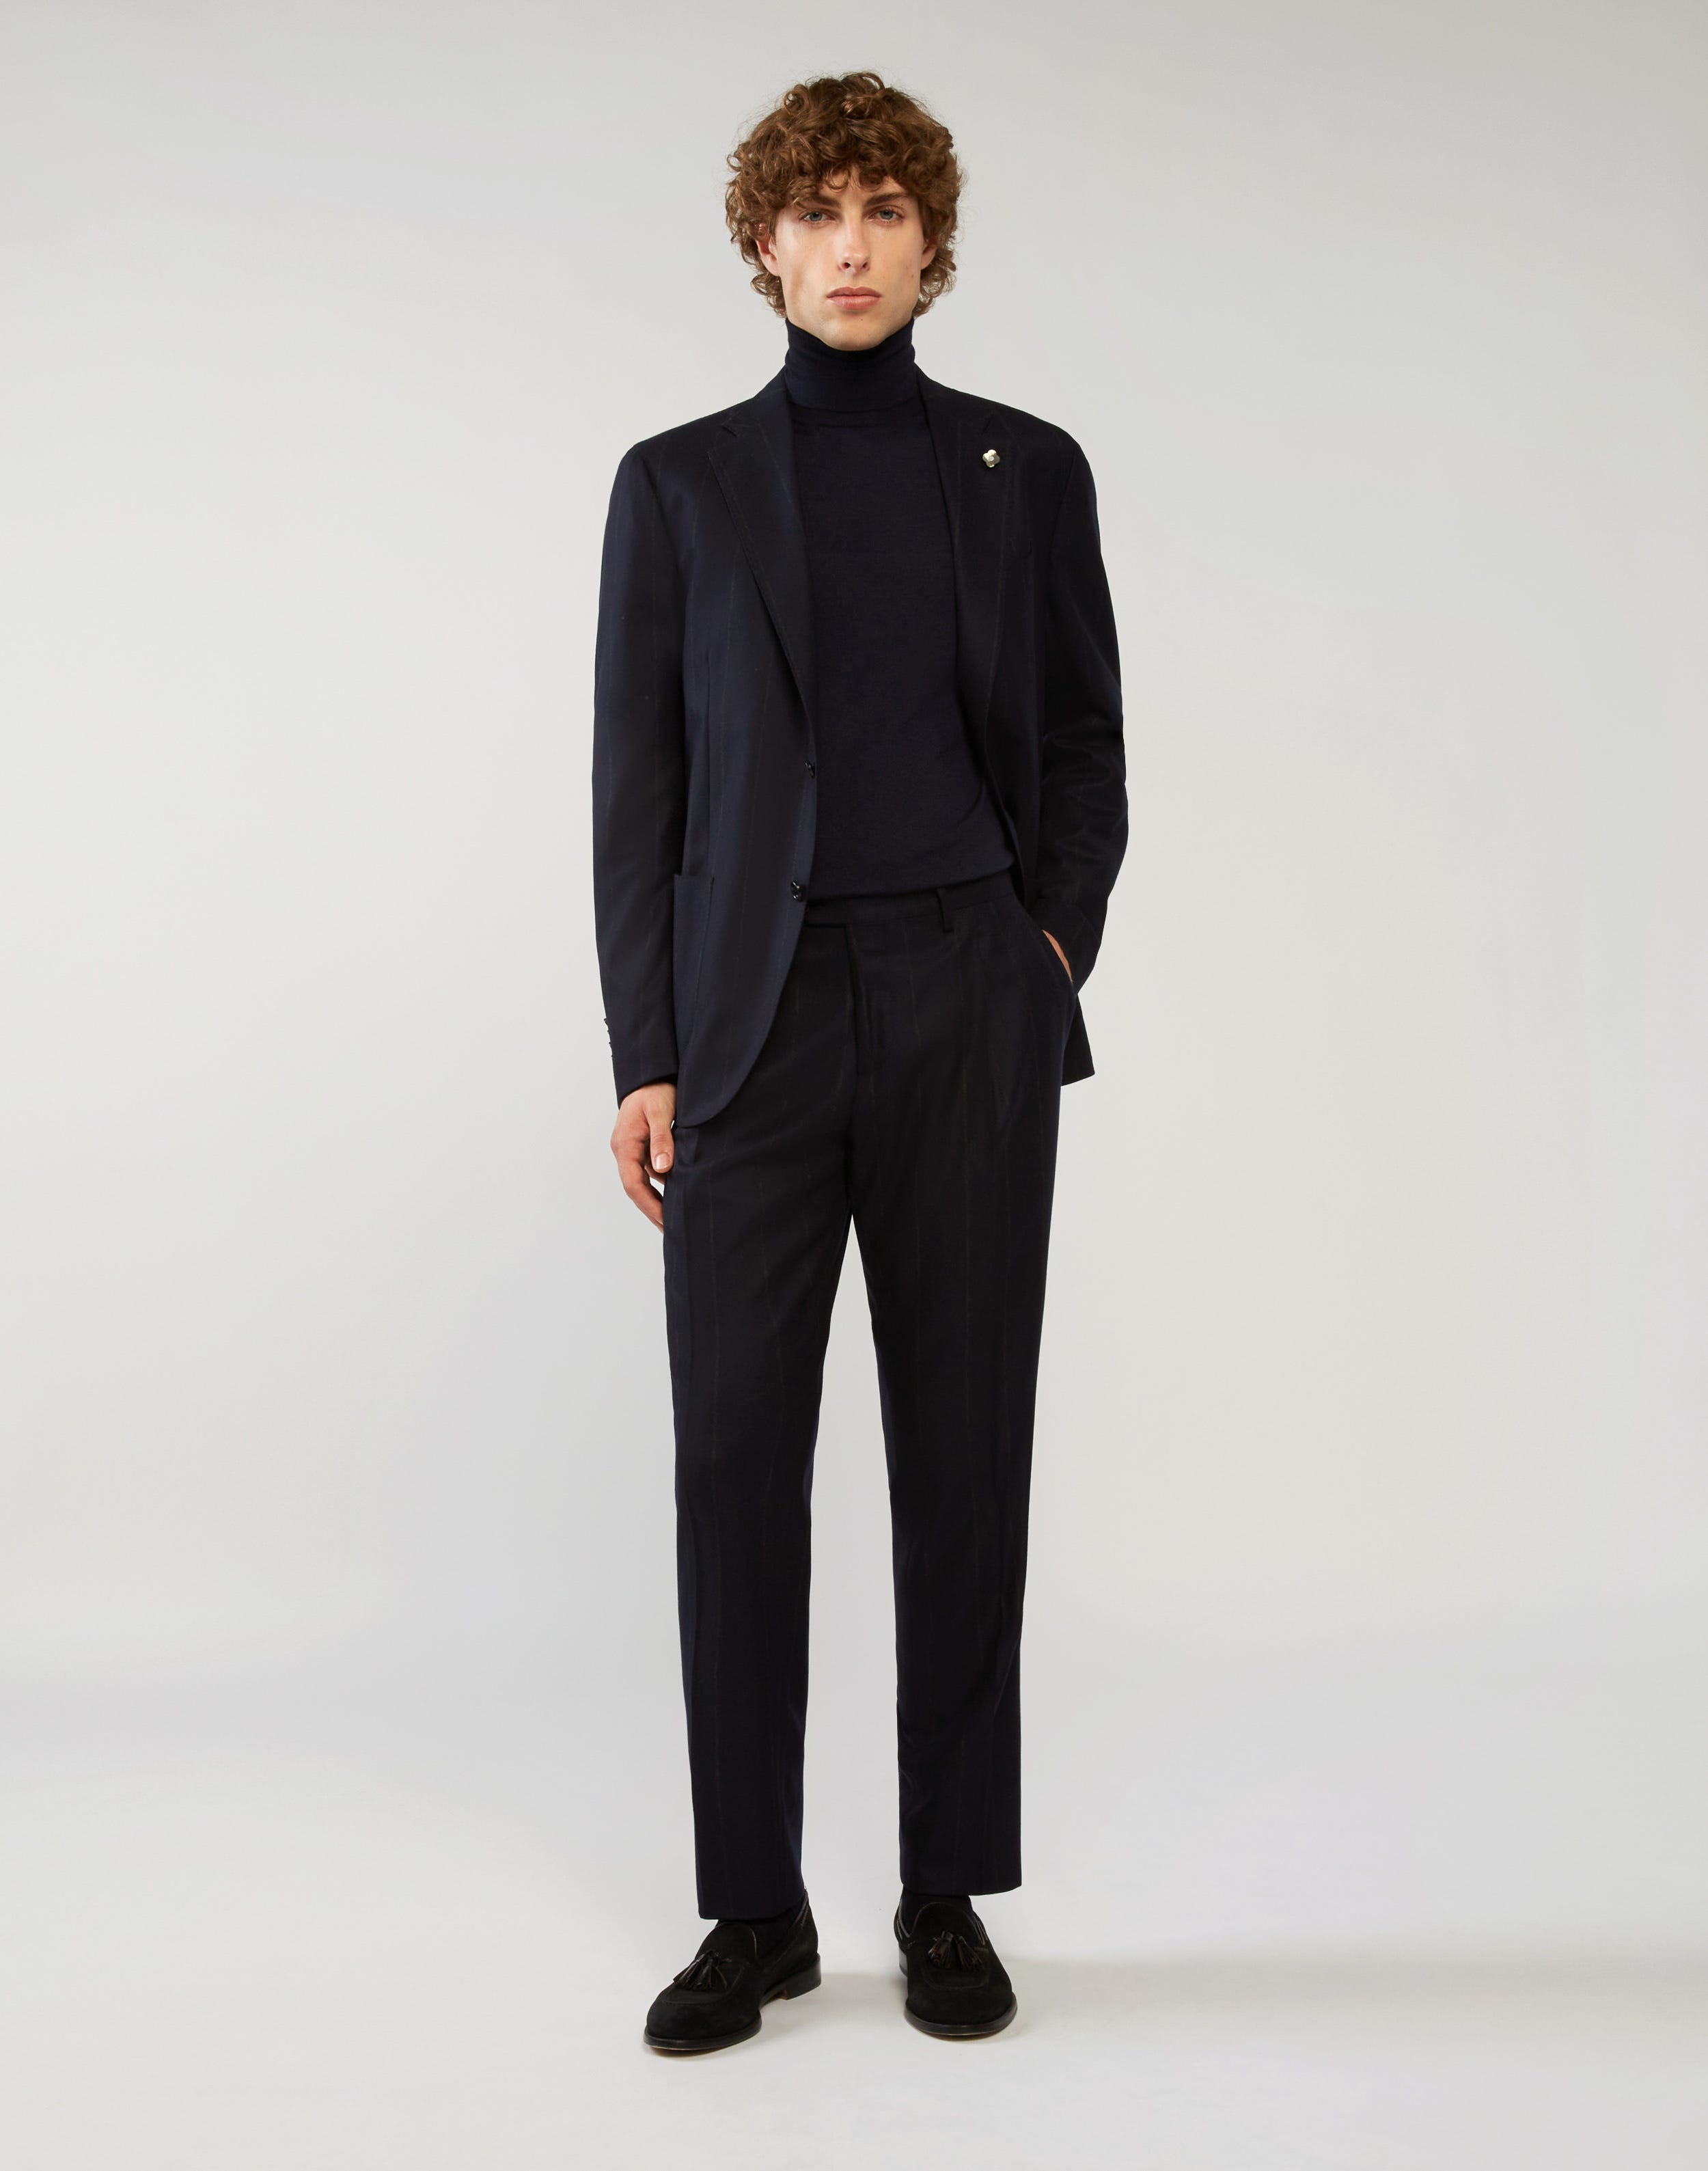 Blue turtleneck in cashmere, silk and wool